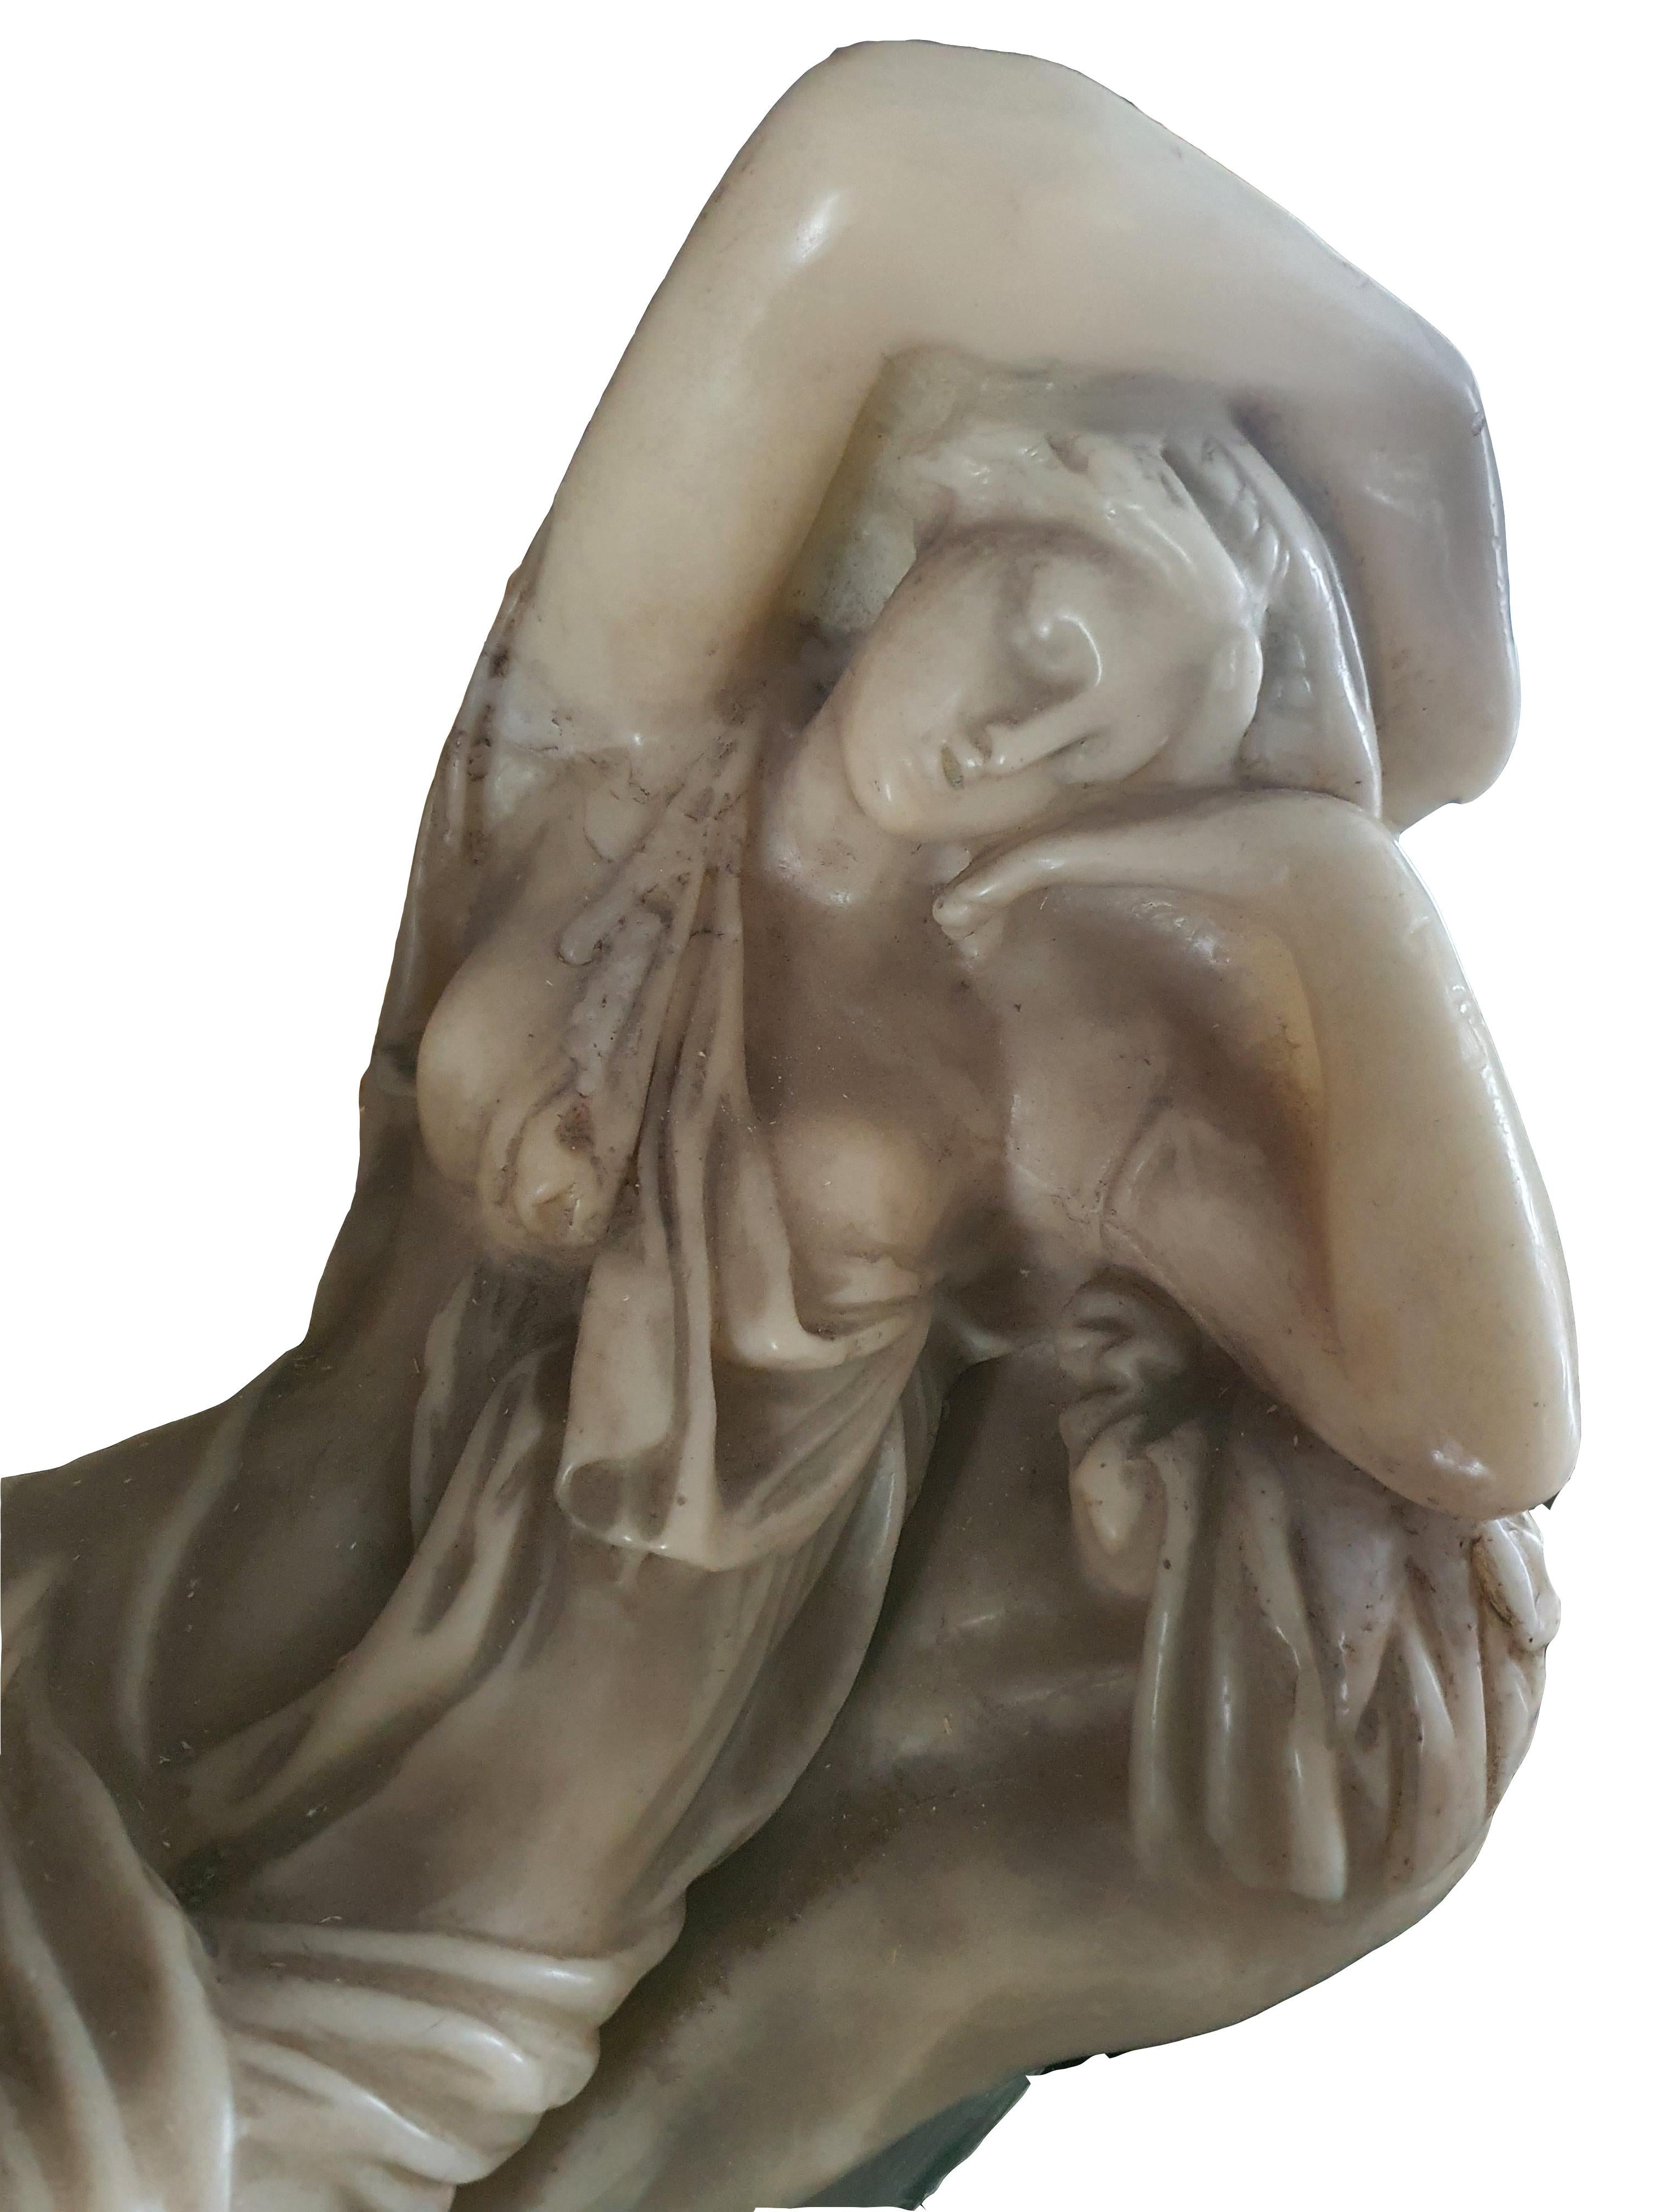 Elegant wax sculpture, finely crafted. Depicting a reclining lady.